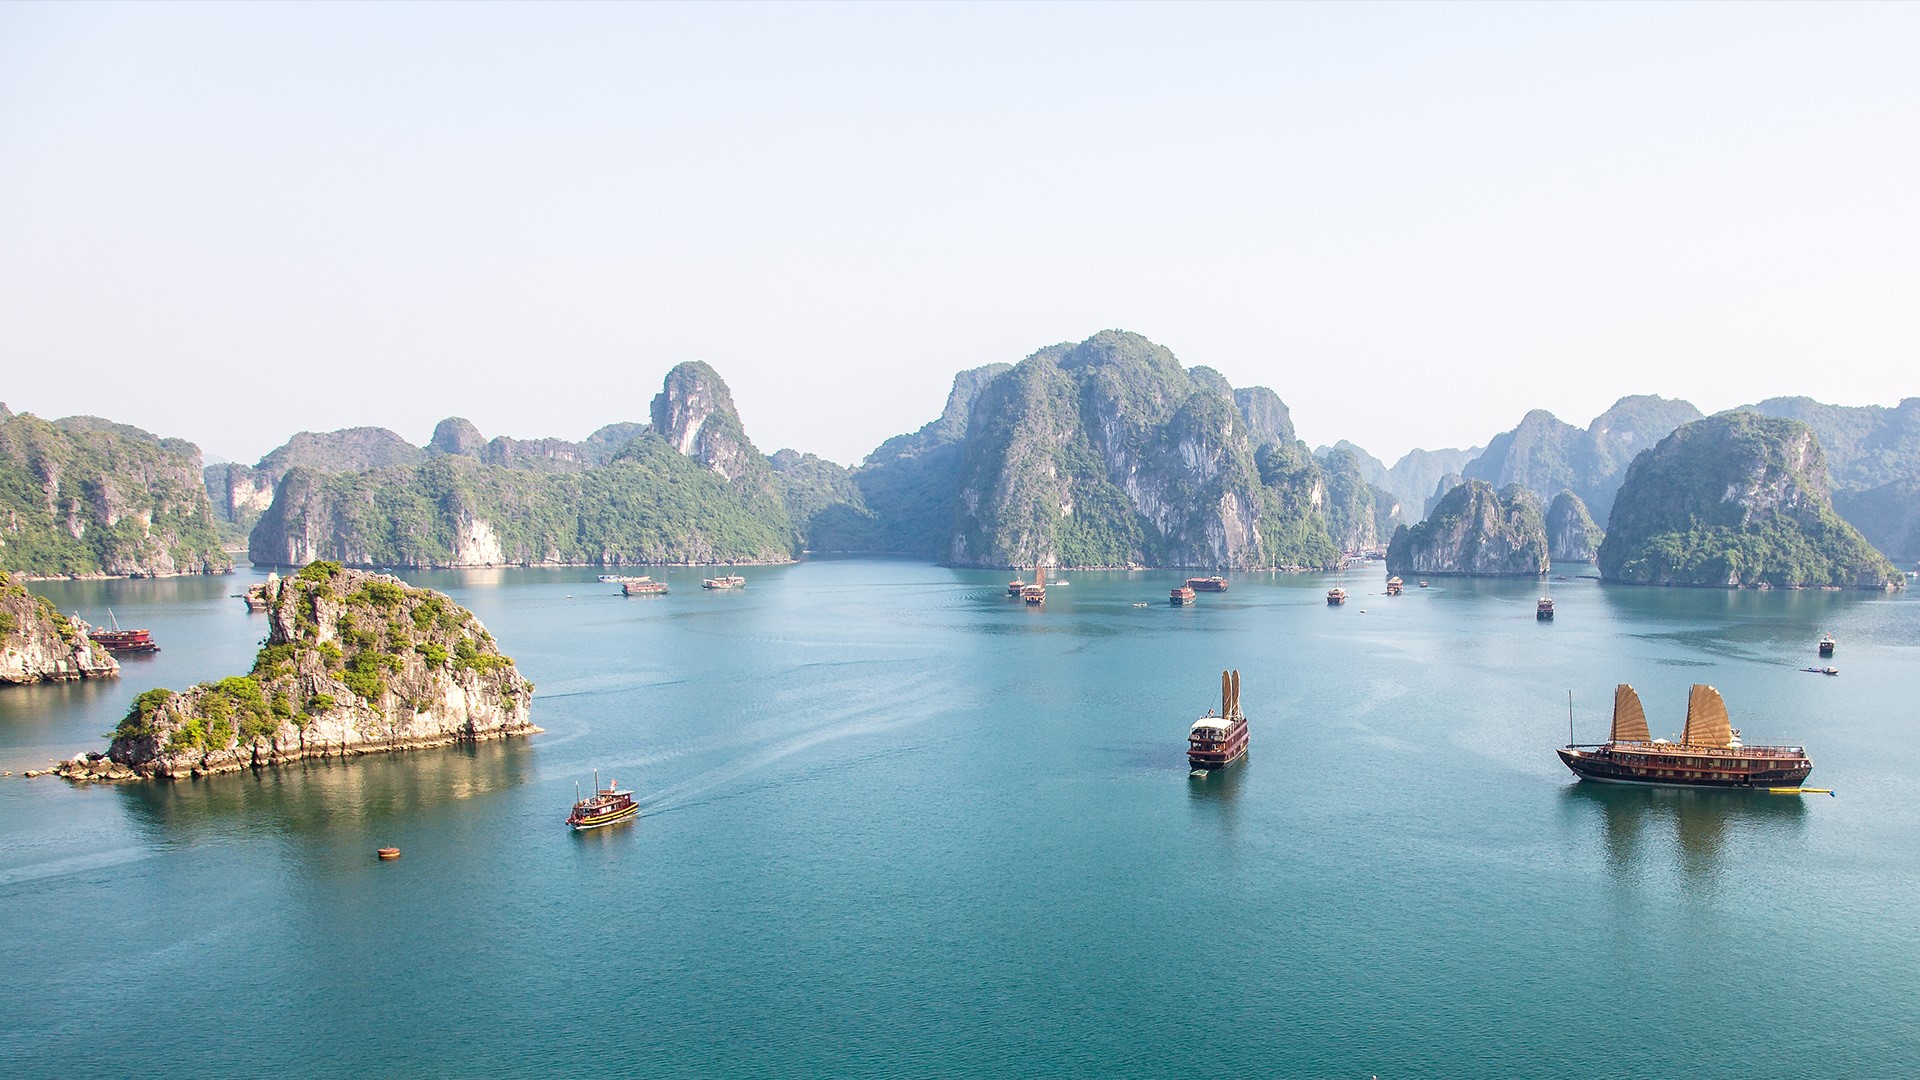 Halong Bay view from the top of an island, Vietnam. Windows 10 Spotlight Image